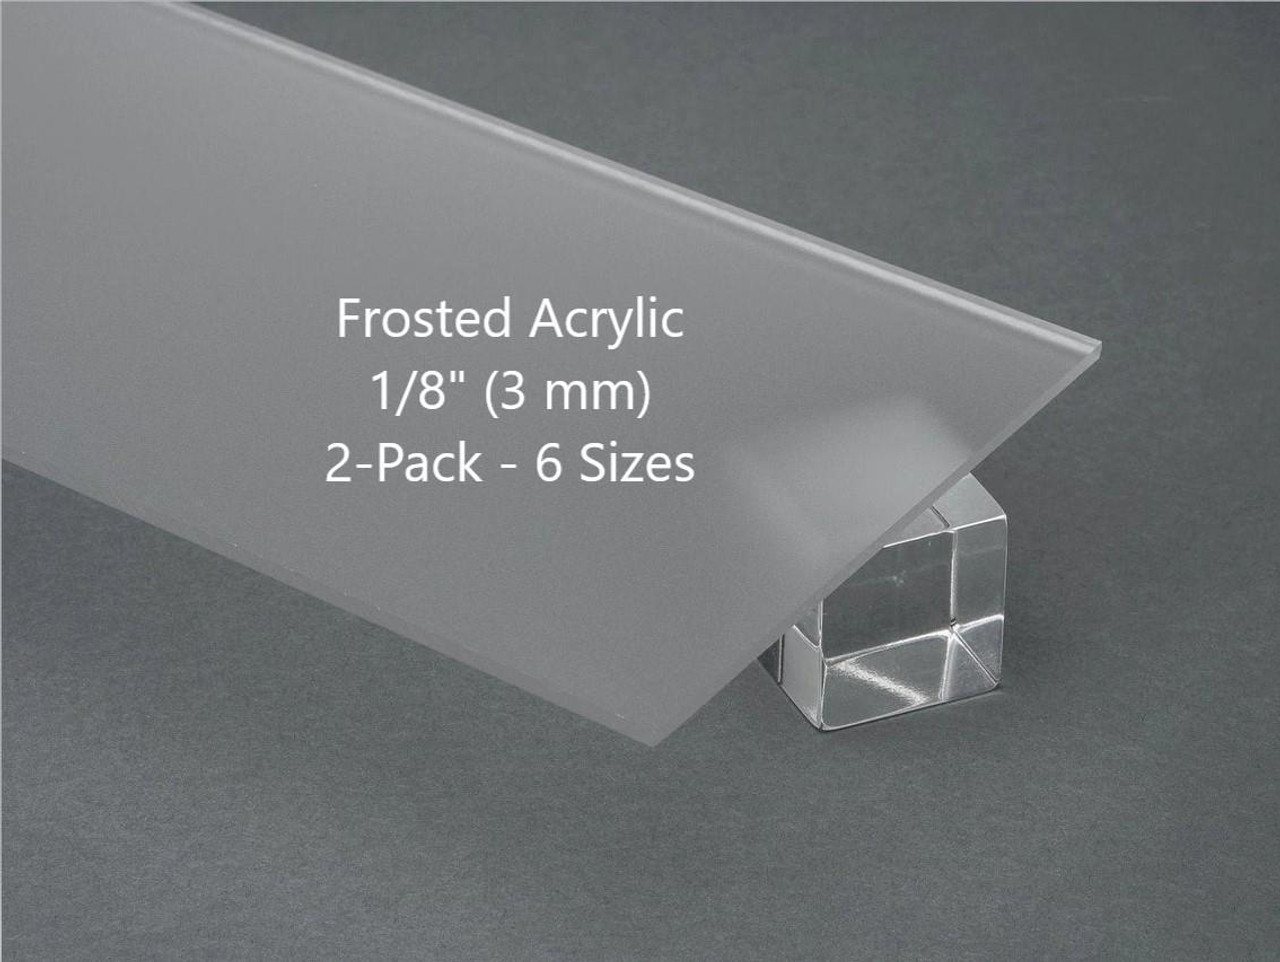 2 Pack Frosted Cast Acrylic Plexiglass Sheets 1/8” Thick (3mm) Easy to Cut  Plastic Plexi Glass with Protective Paper - Signs, DIY Display Projects,  Crafts, Shelves